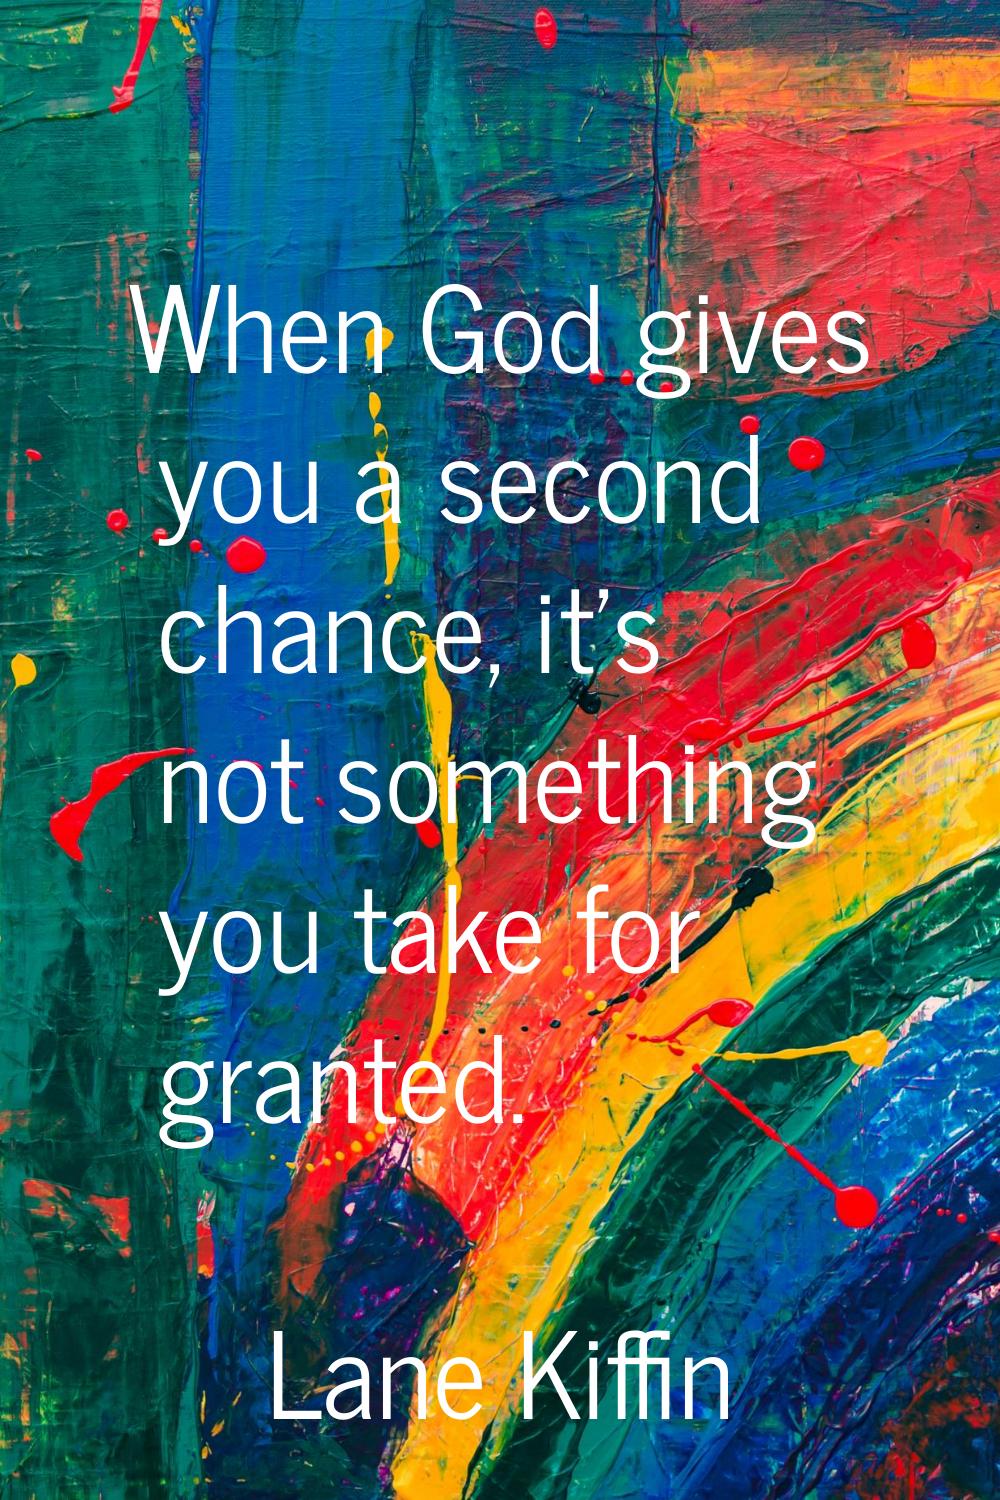 When God gives you a second chance, it's not something you take for granted.